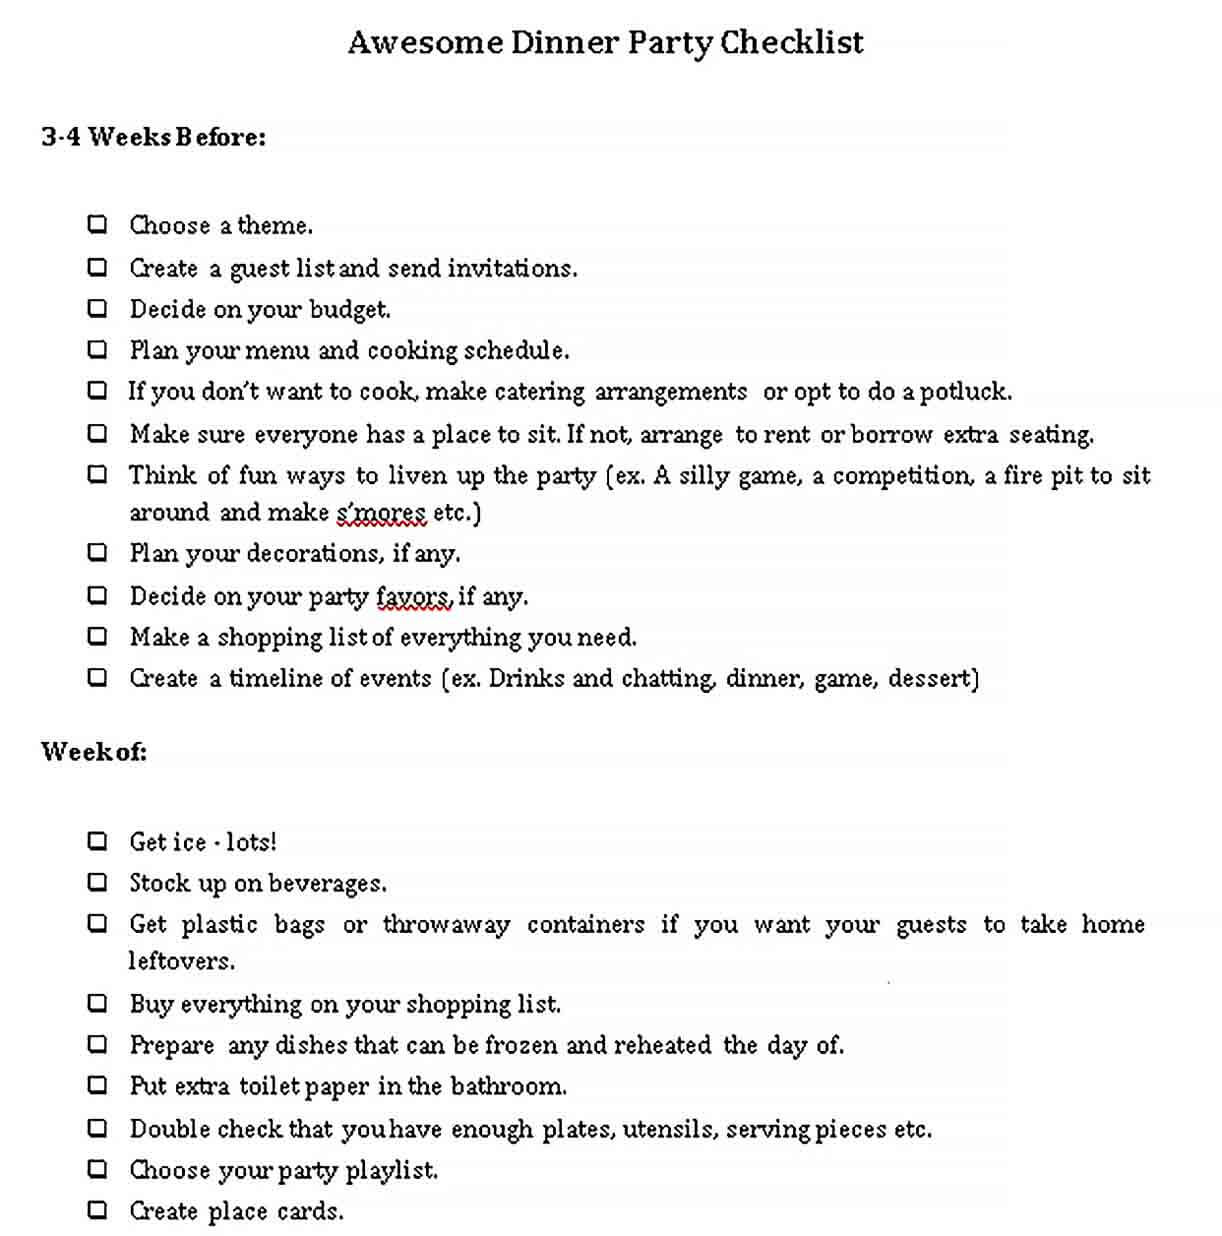 Sample Dinner Party Checklist Template